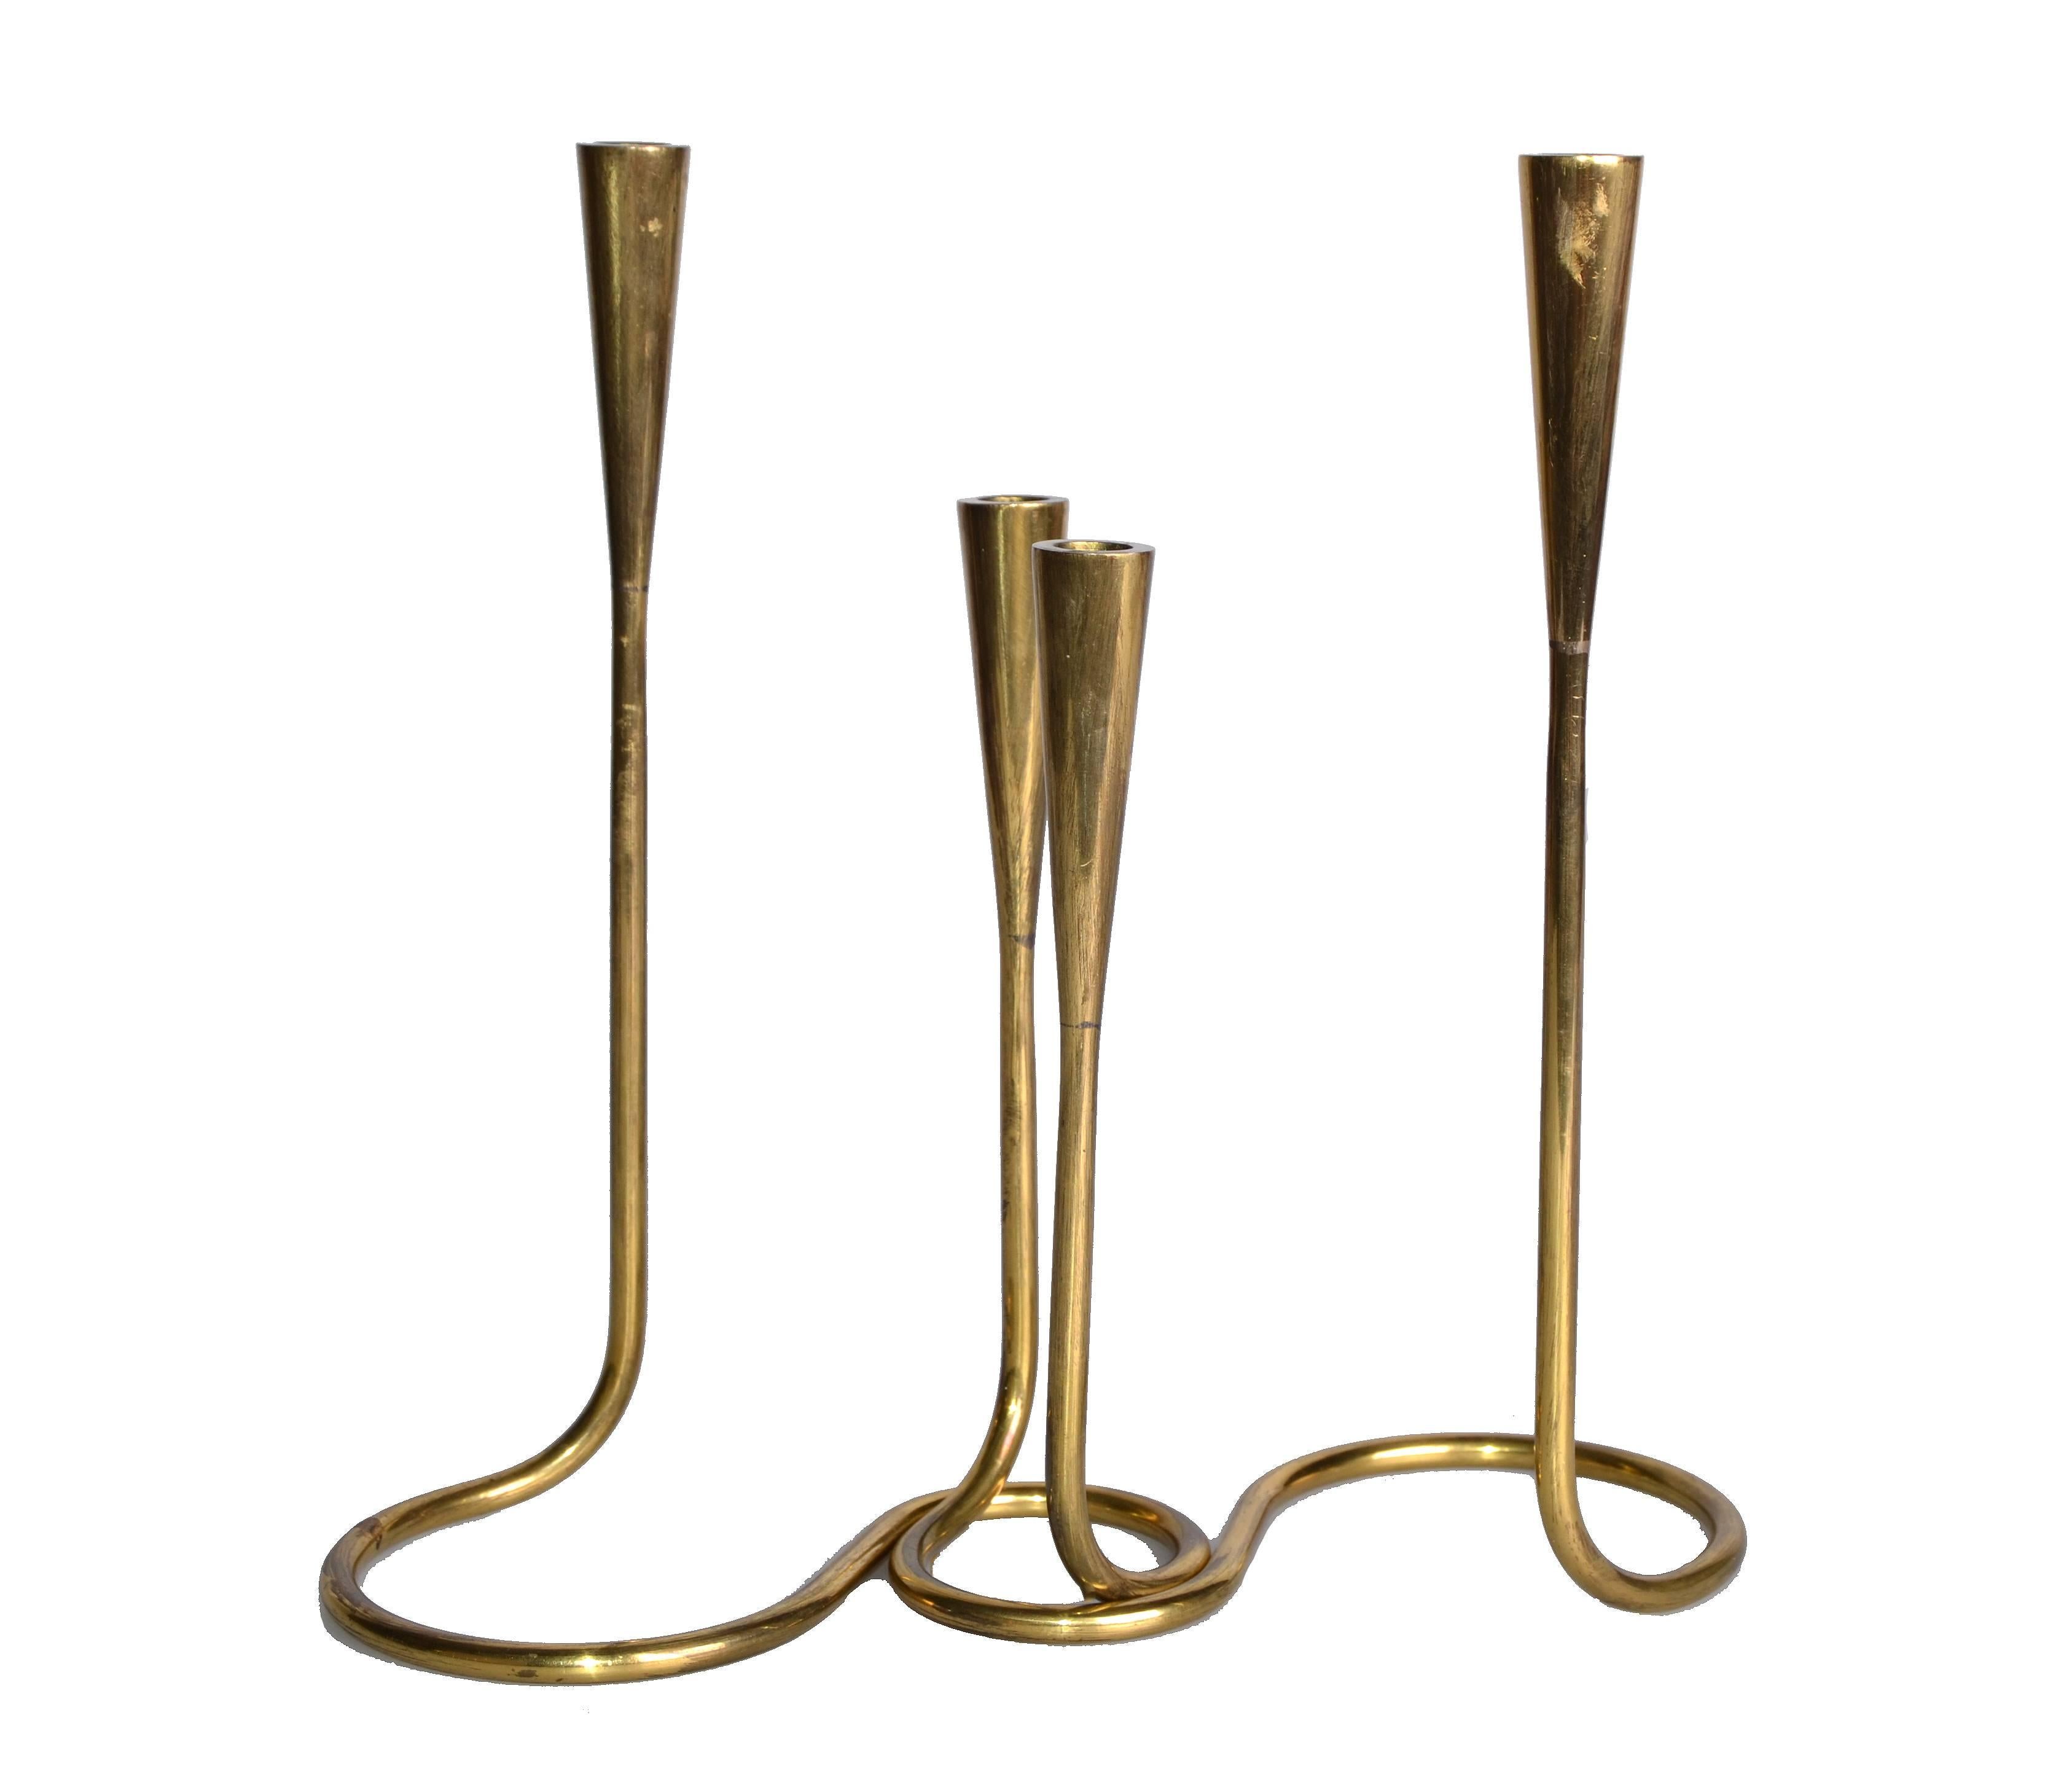 A pair of brass serpentine double candlesticks by Illums Bolighus.
The pair can be intertwined or arranged separately for table decoration.
Both are marked underneath.
Great Scandinavian craftsmanship.